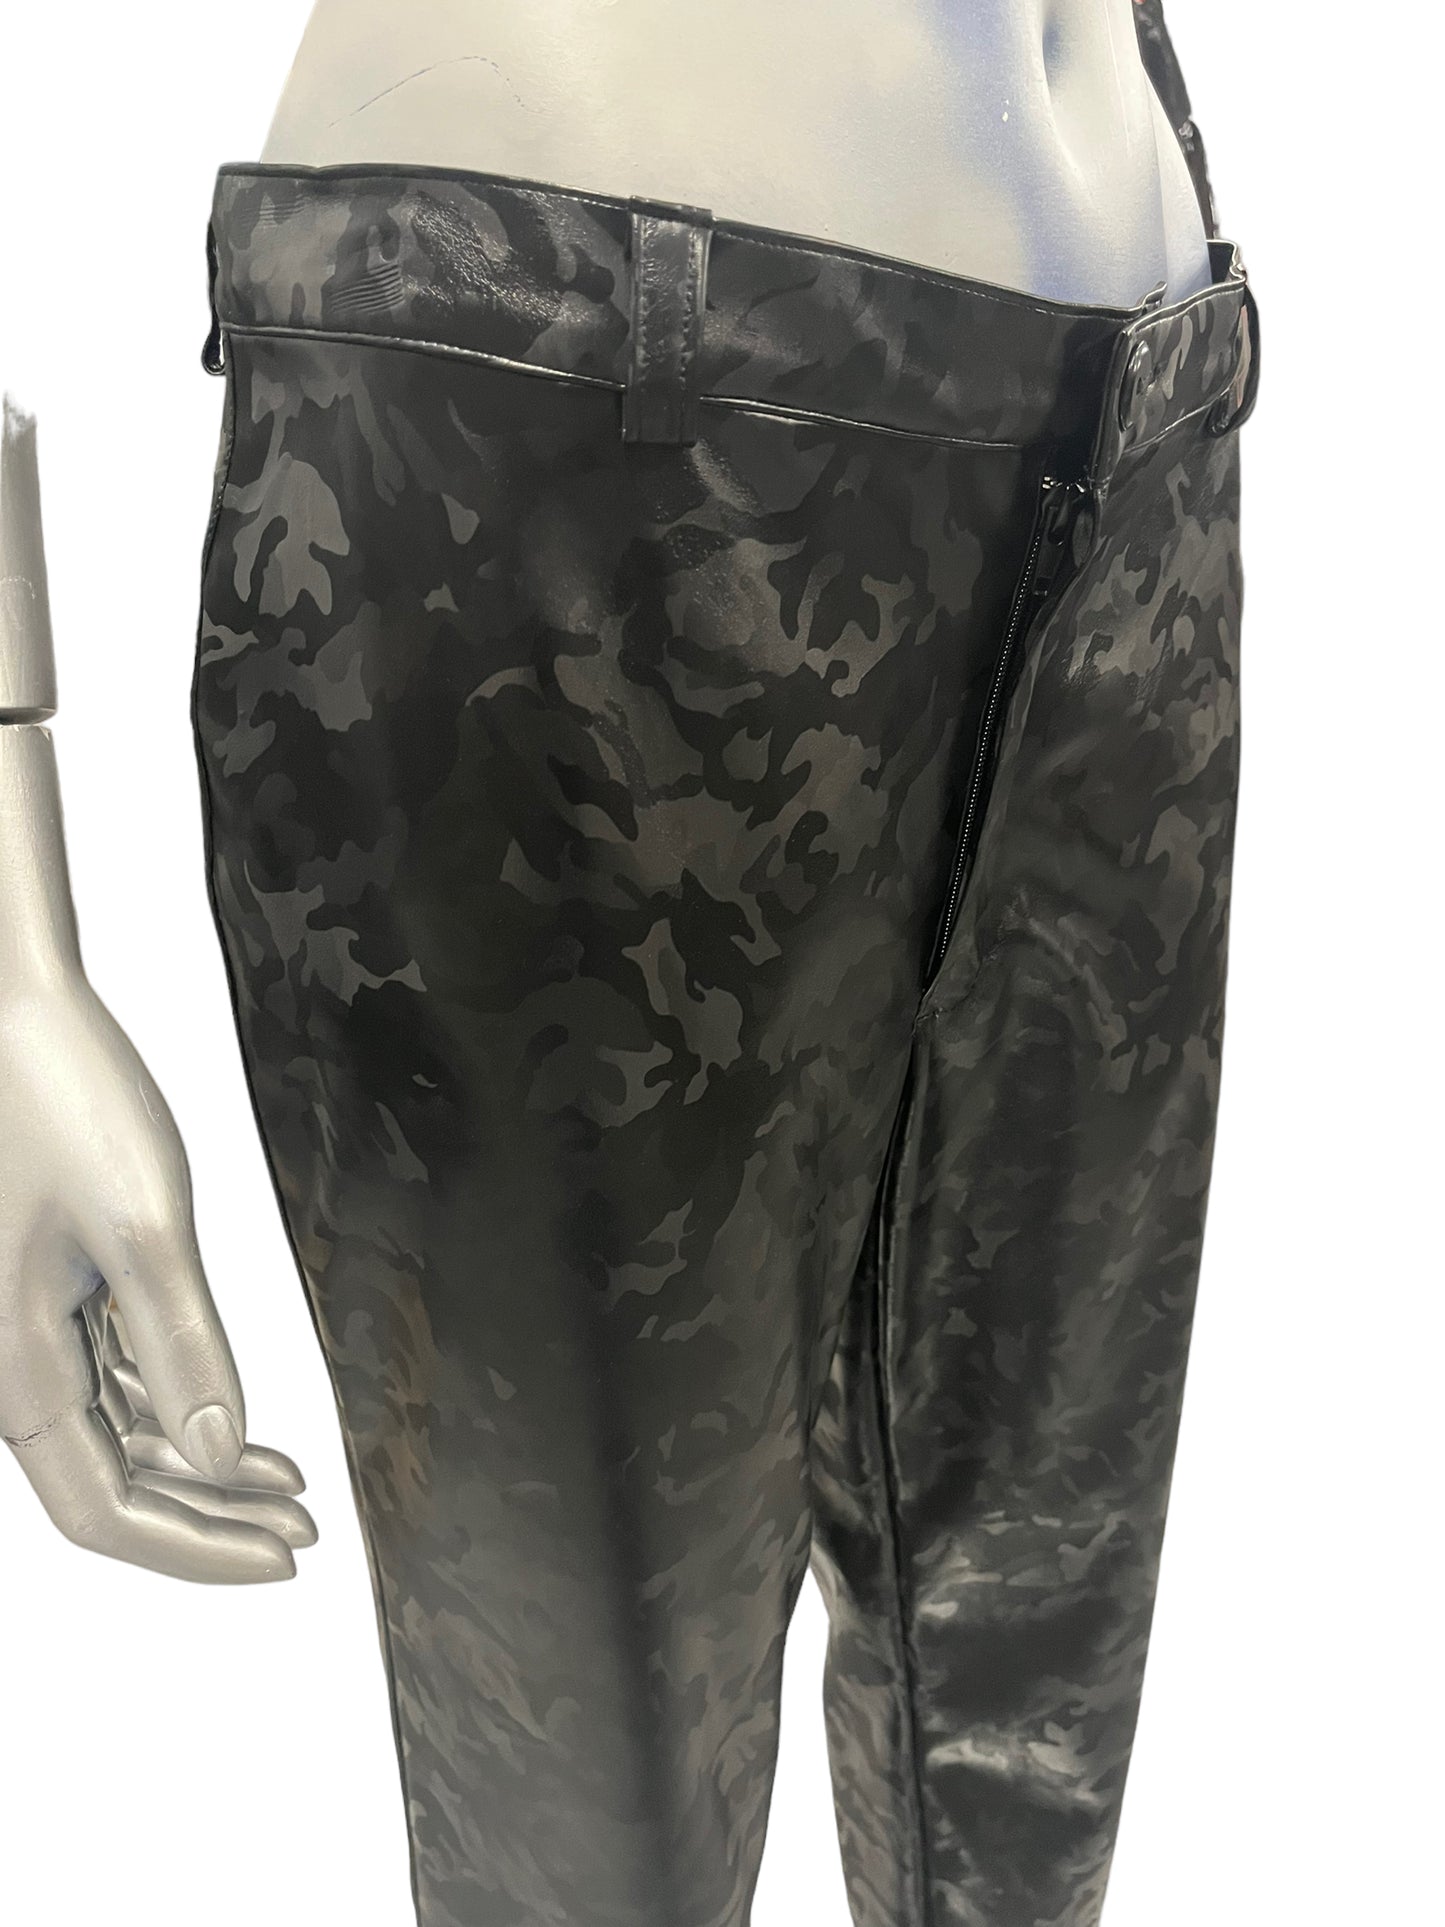 Peter Domenie - LL82 - Black Long Pants With Camouflage Print